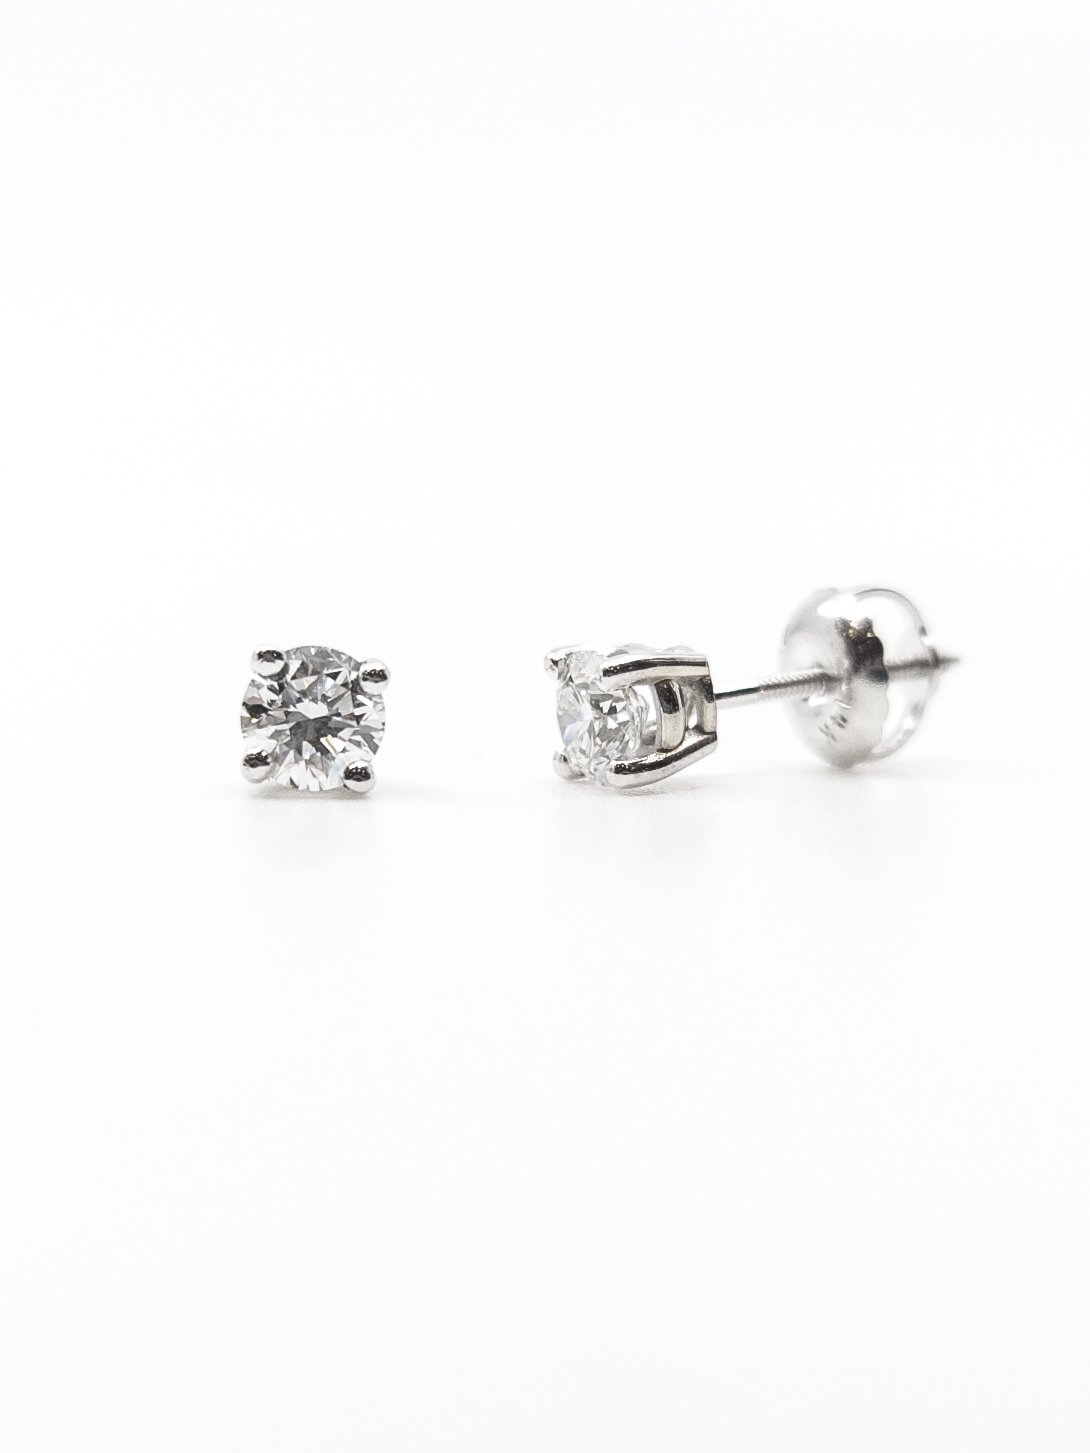 14K White Gold 0.20cttw Lab Grown Diamond Solitaire Earrings with Screw Back